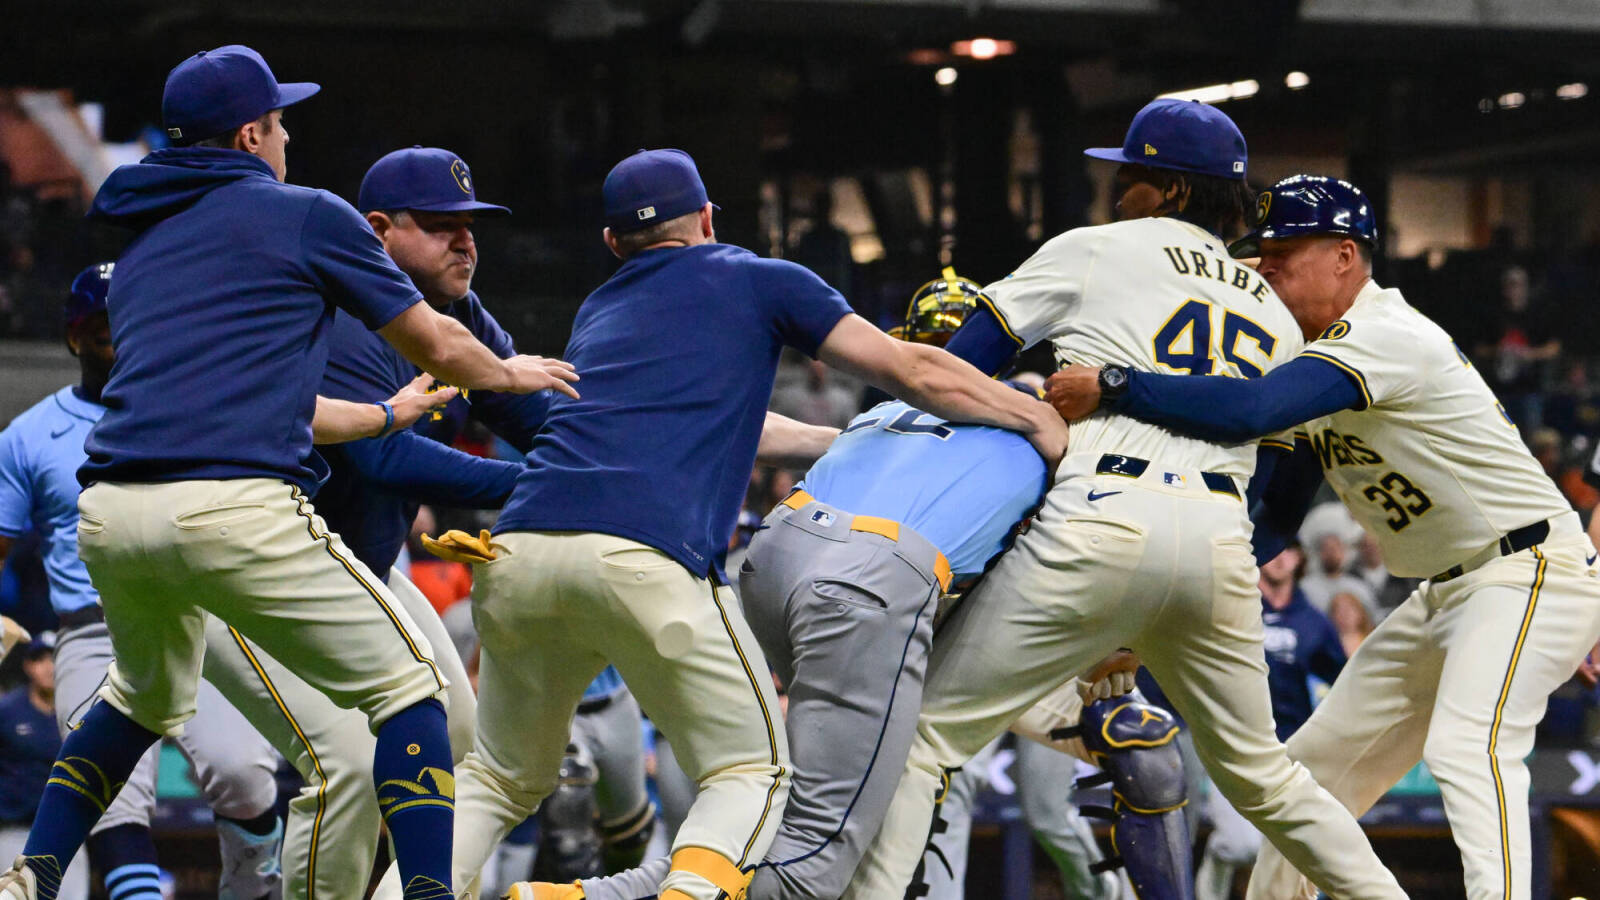 Watch: Brewers, Rays clear benches as wild brawl breaks out